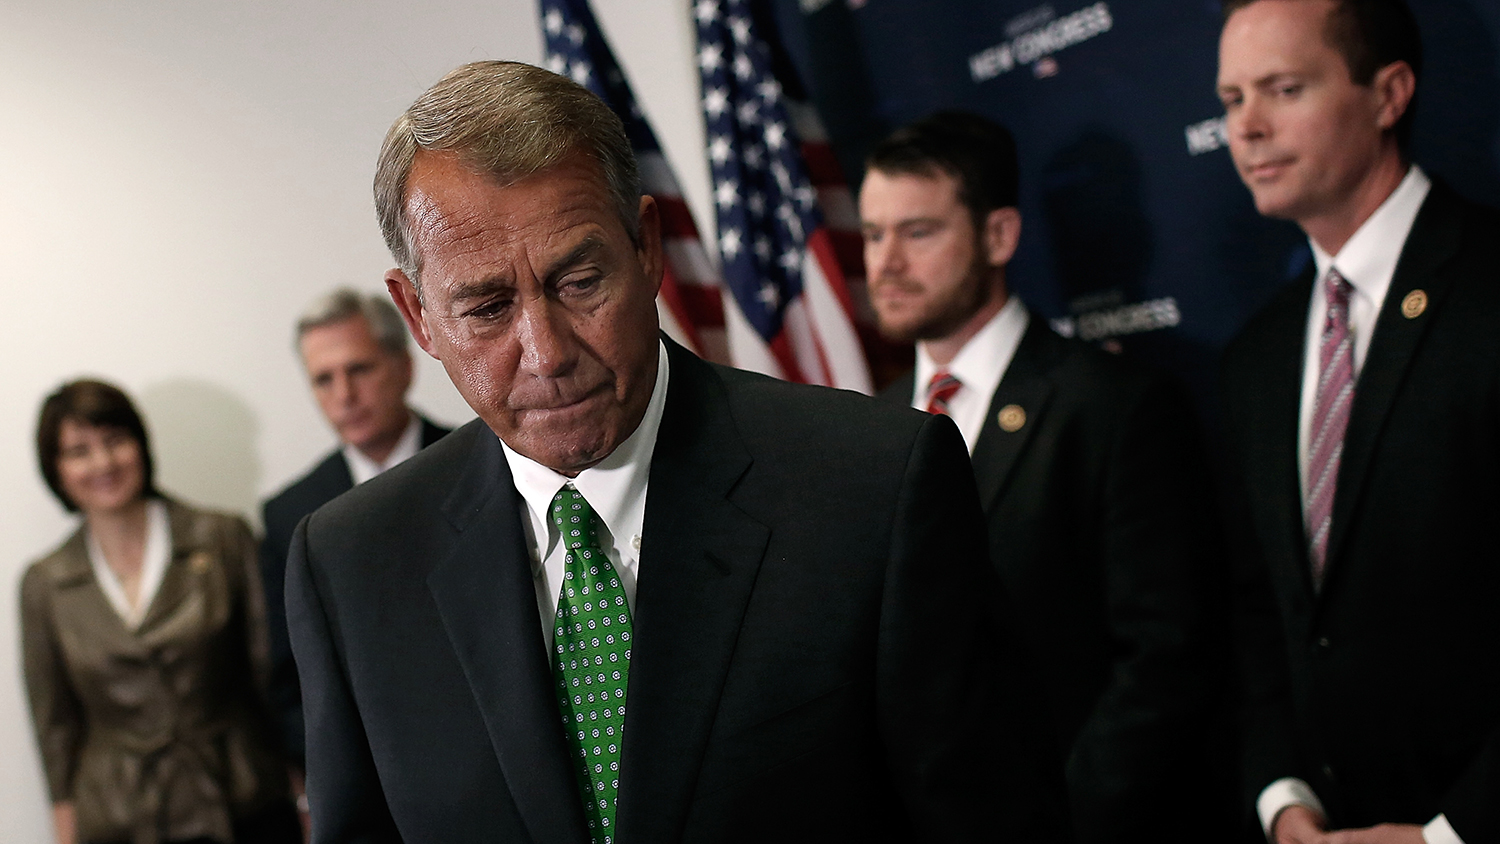 Speaker of the House John Boehner (R-OH) departs after answering questions during a press conference at the U.S. Capitol January 7, 2015 in Washington, DC
